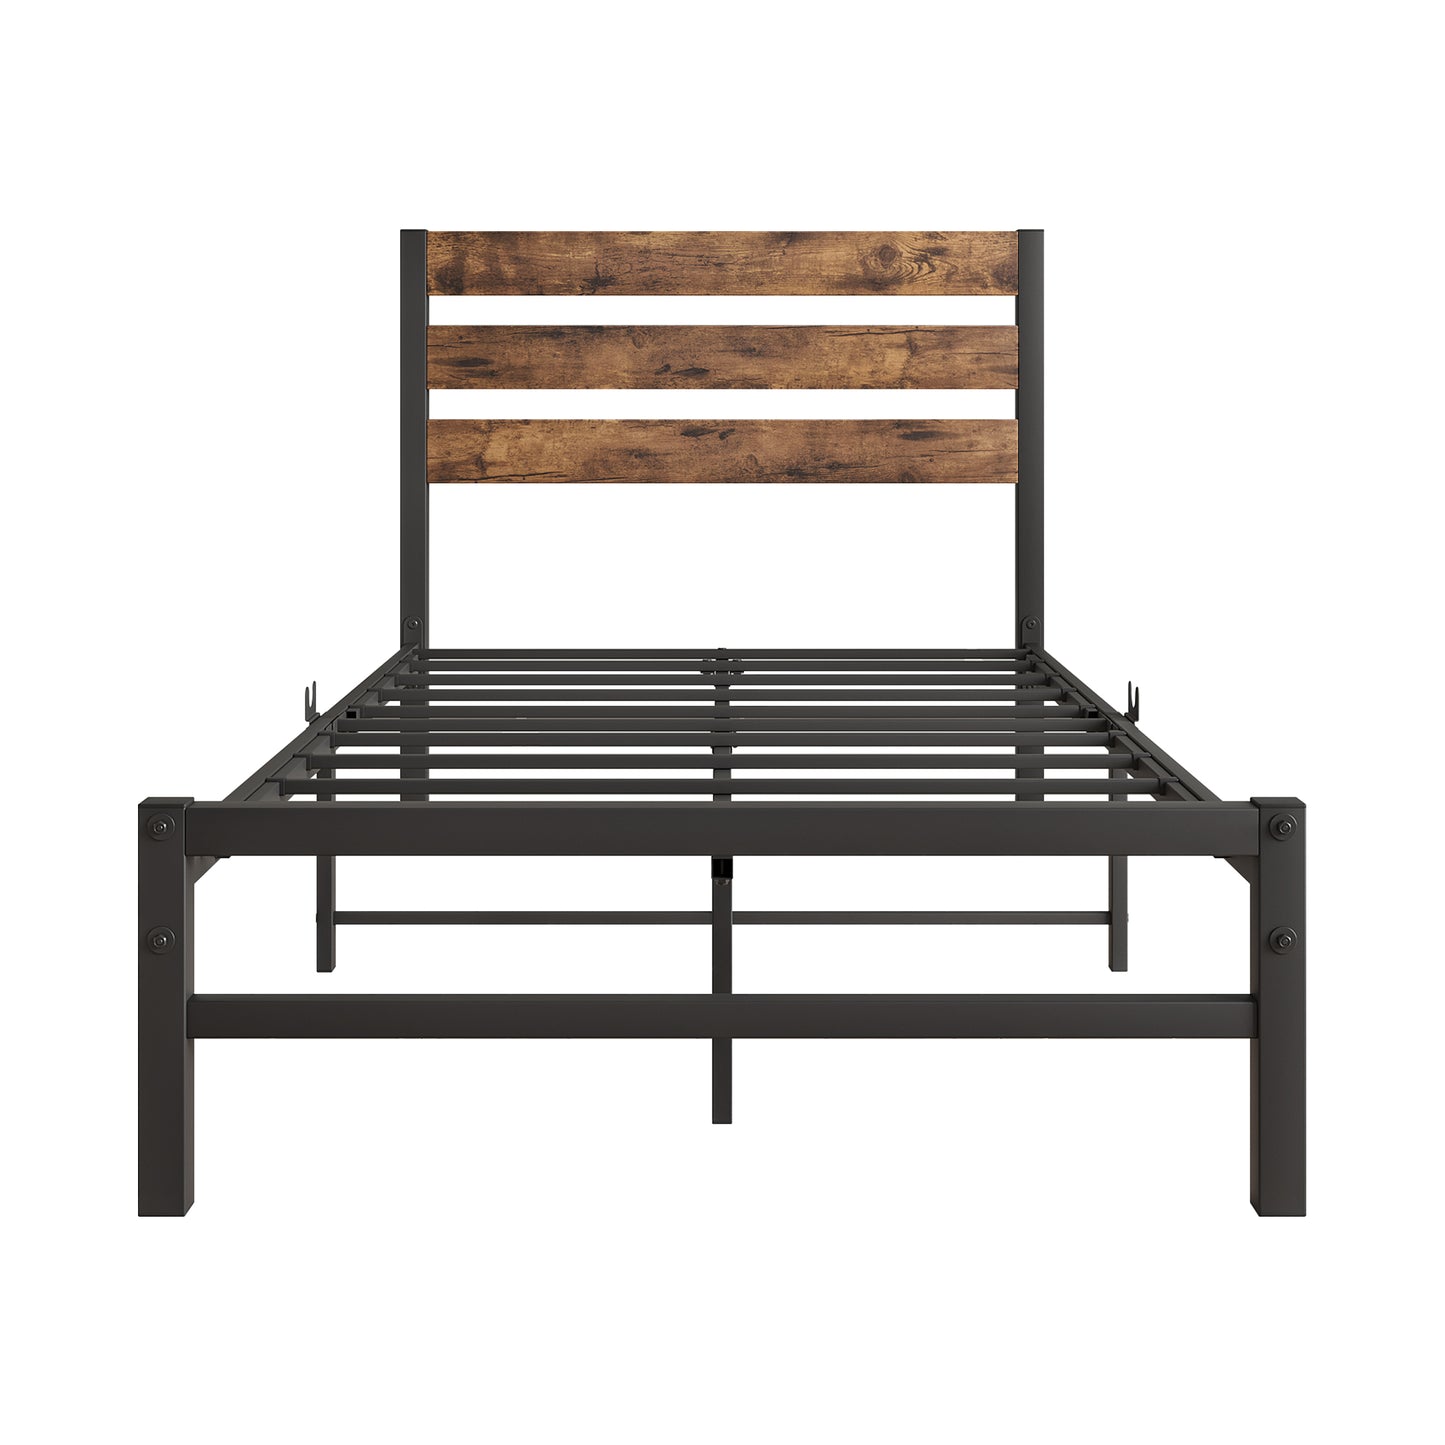 Platform Queen Size Bed Frame with Rustic Vintage Wood Headboard